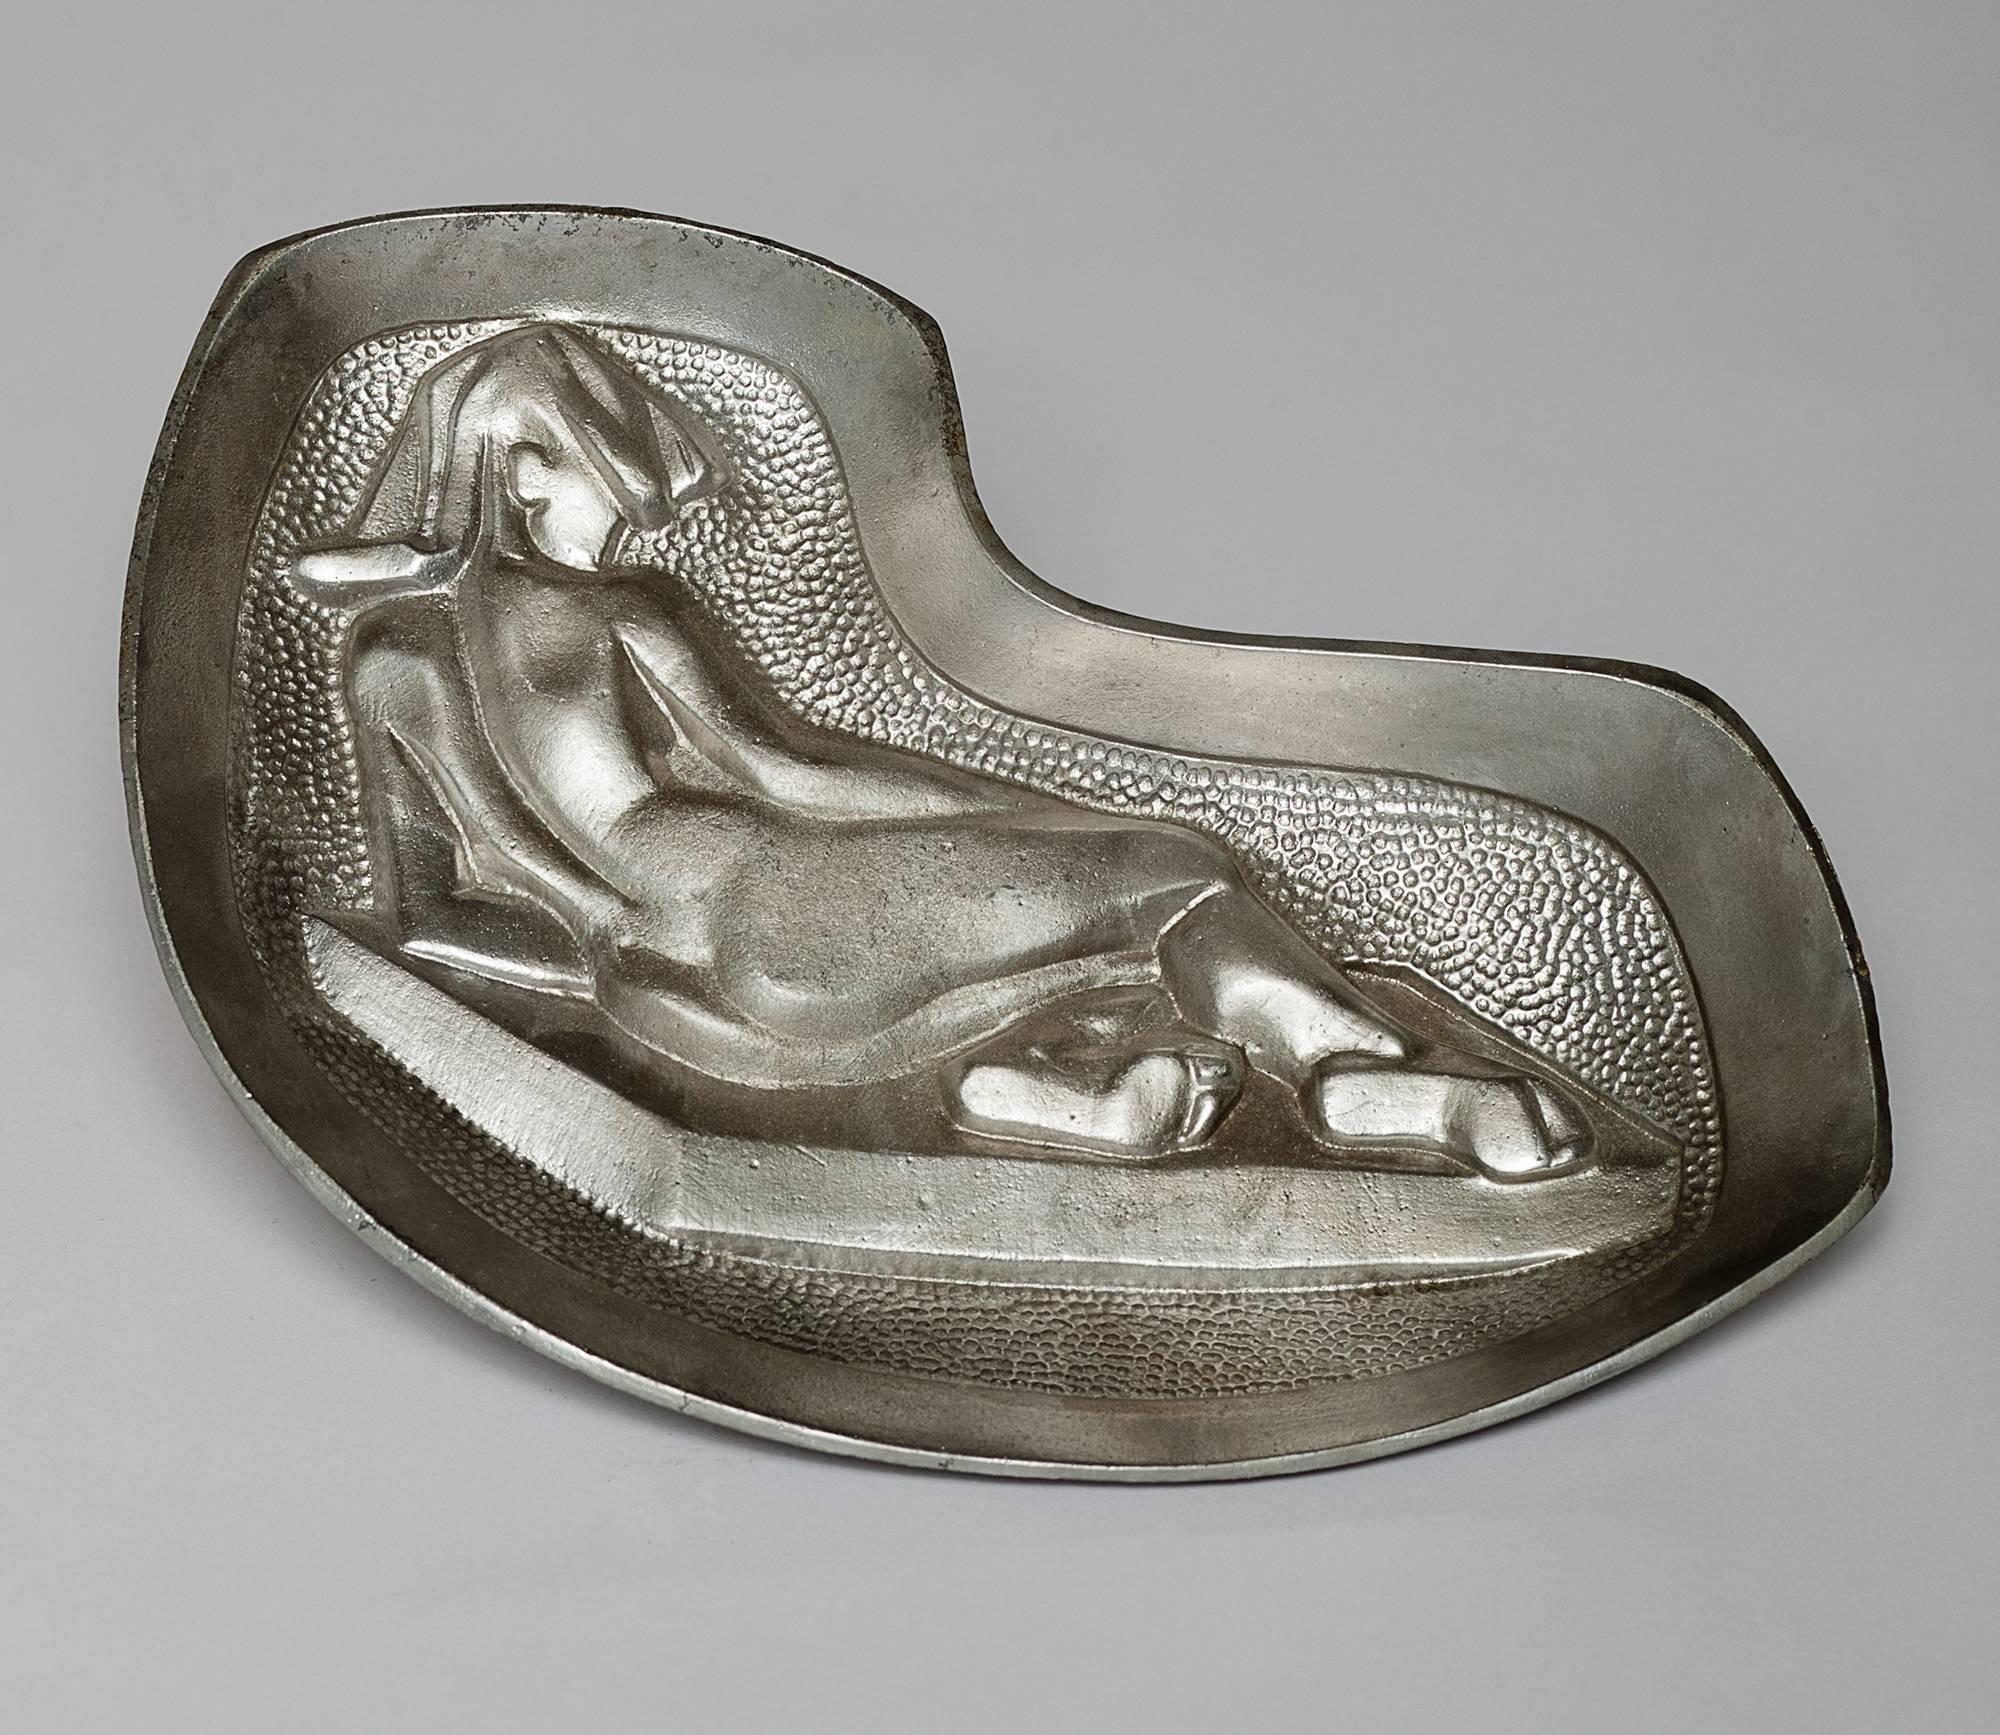 Ashtray with Woman on Base - Sculpture by Dudley Vaill Talcott